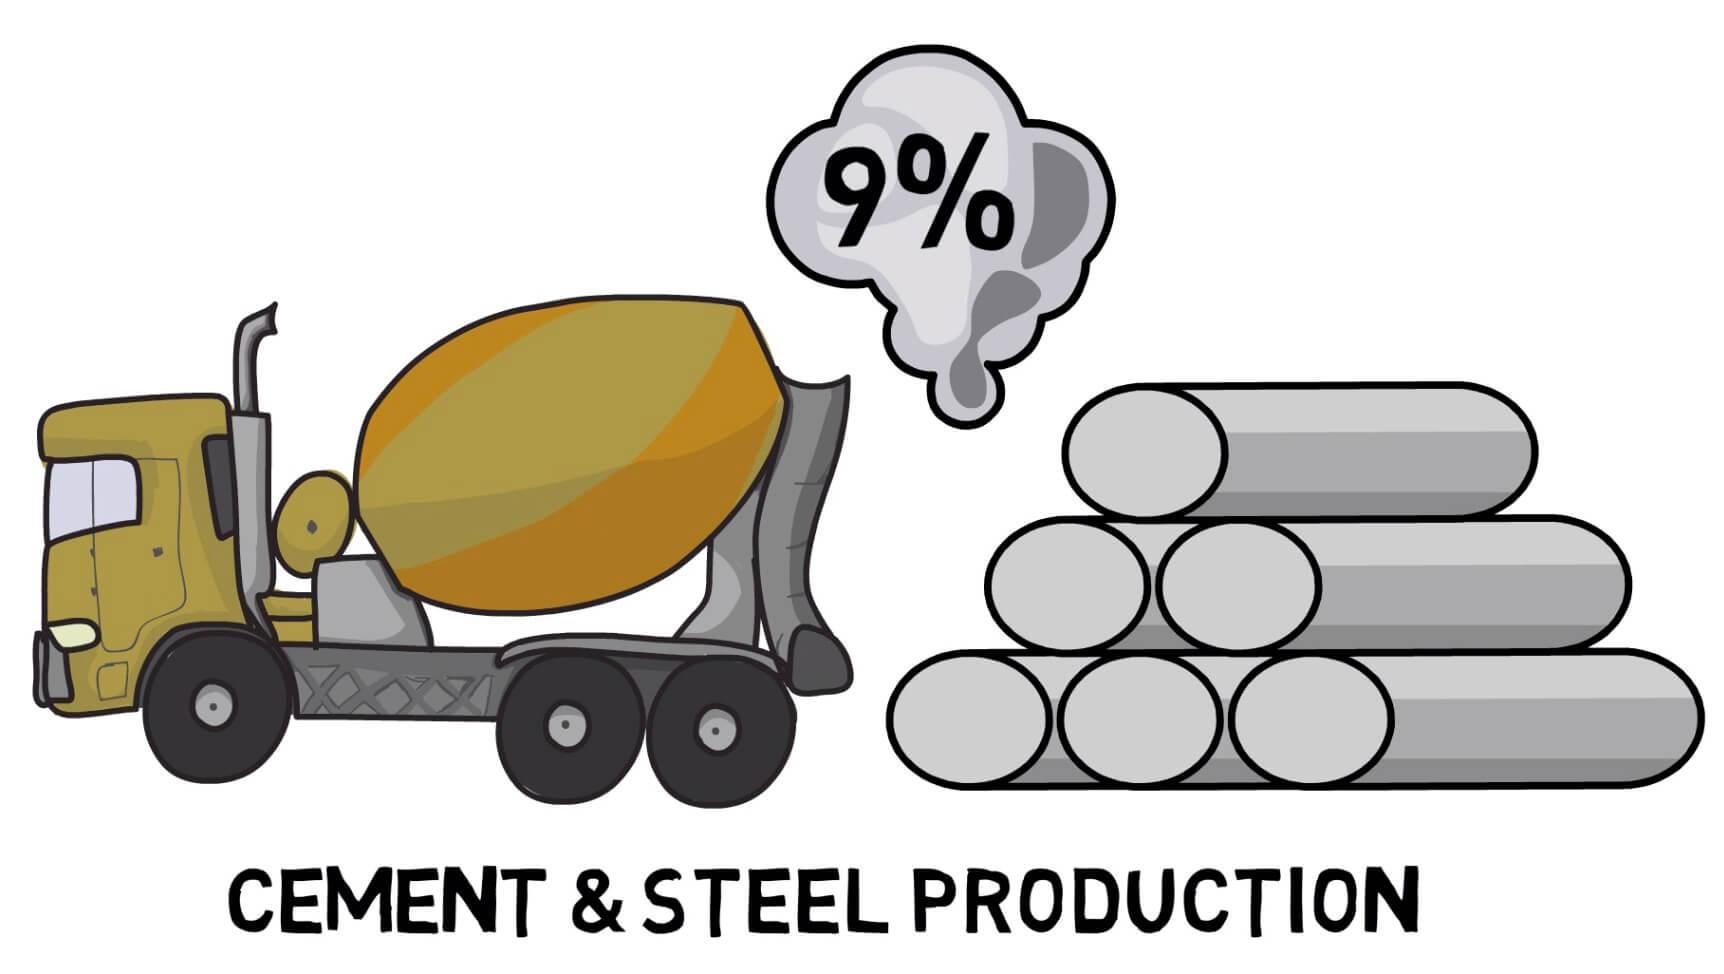 Cement and steel production